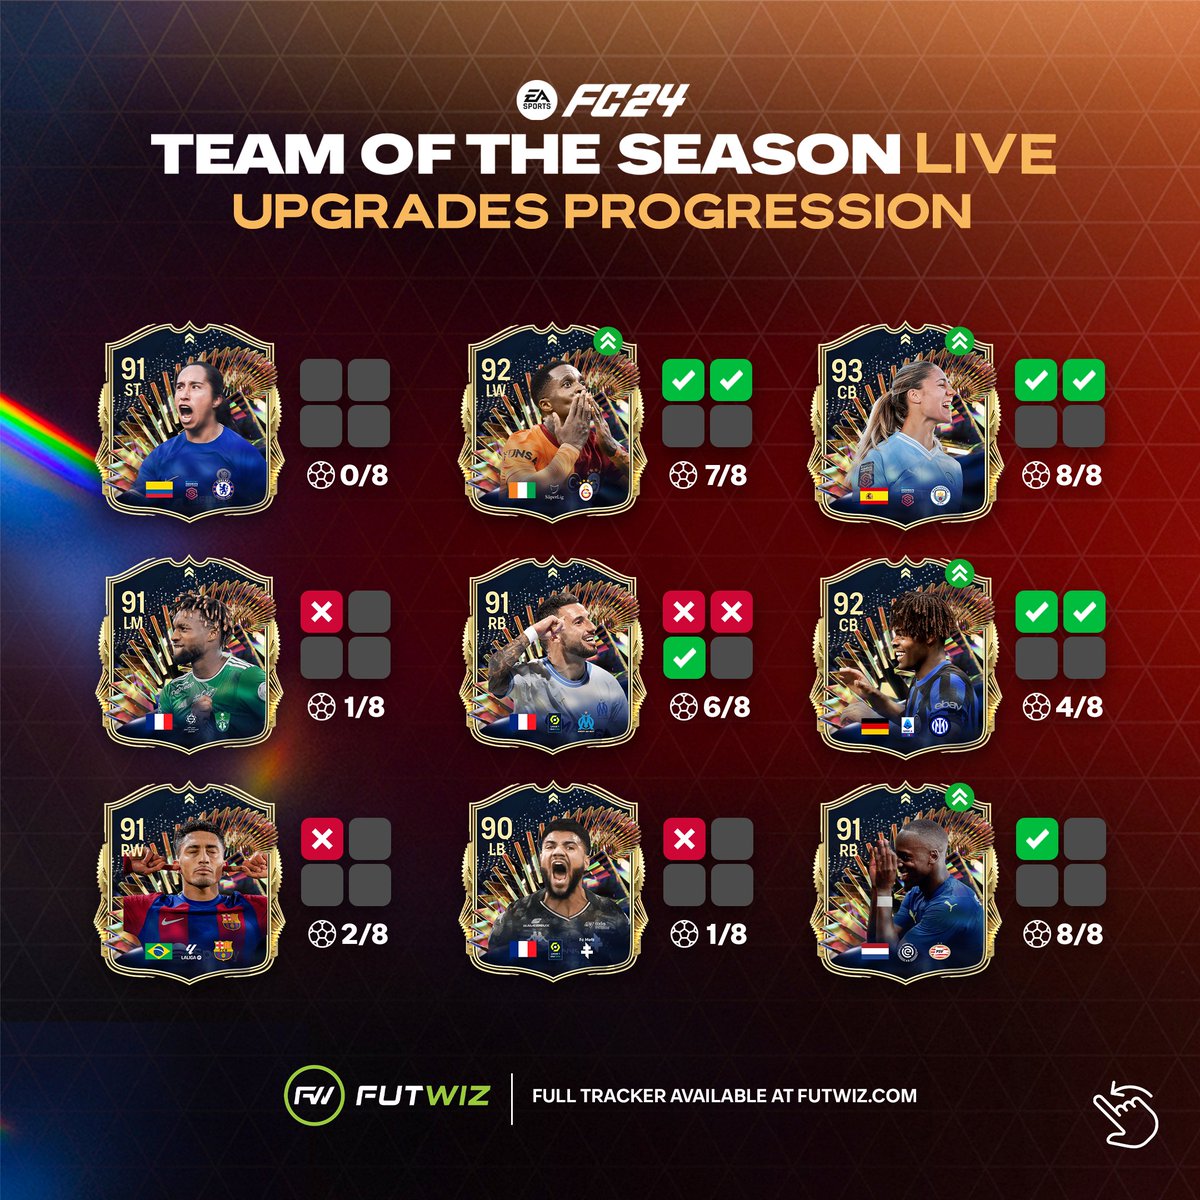 TOTS Live Upgrades so far ⏫🔵

So many nice upgrades coming this week! 

Full Tracker in the replies 👇#EAFC #FC24